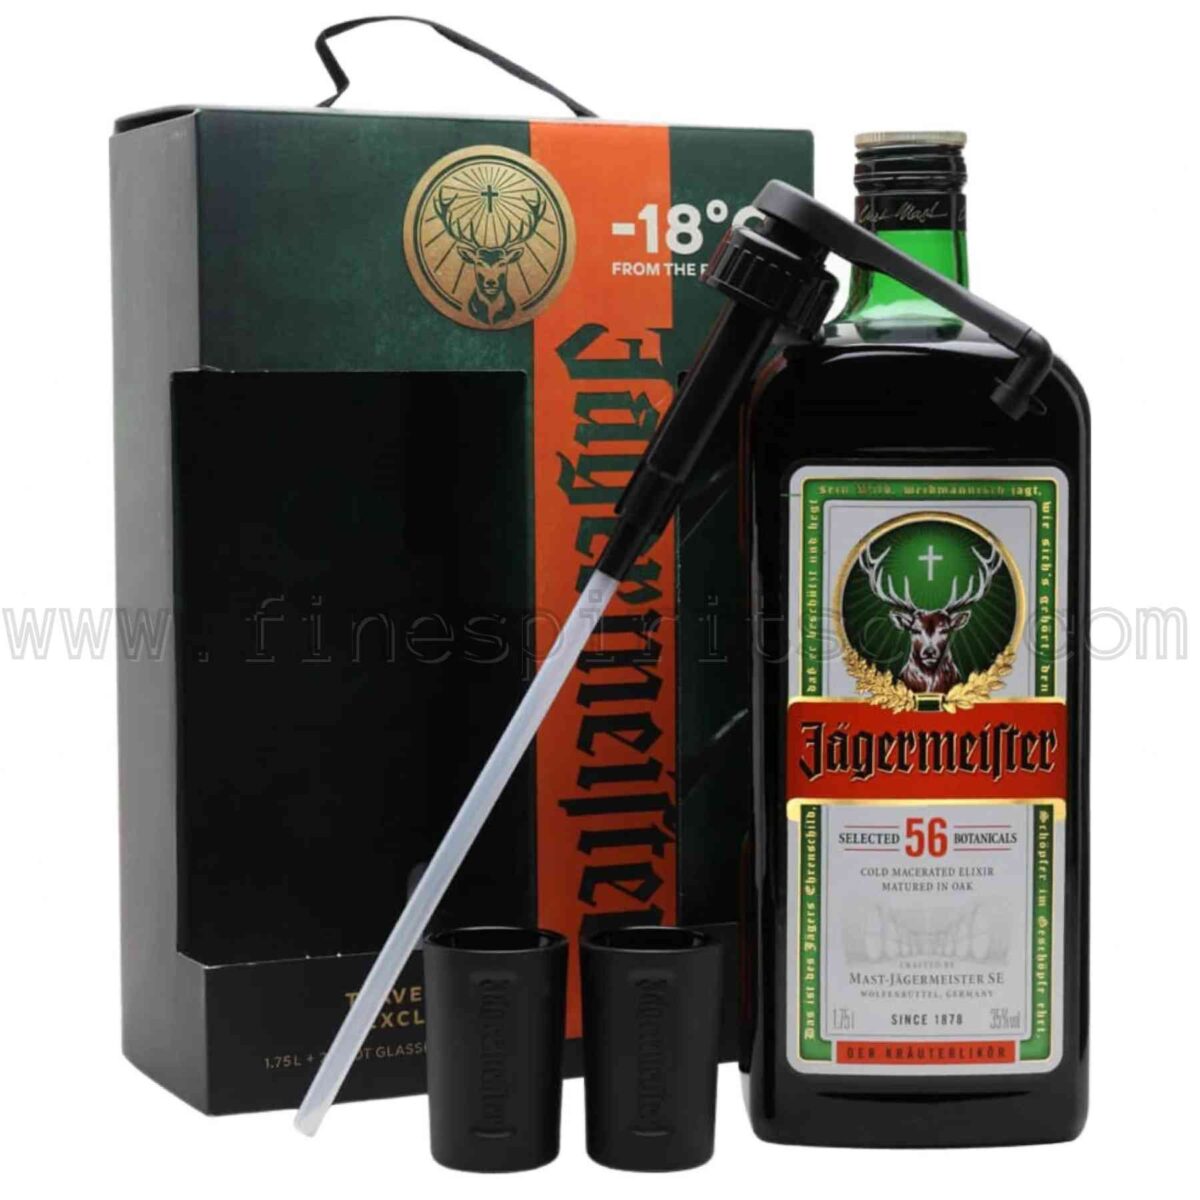 Jager Travelers Exclusive Party Box Shot Glass Pump 175cl 1.75L 1750ml